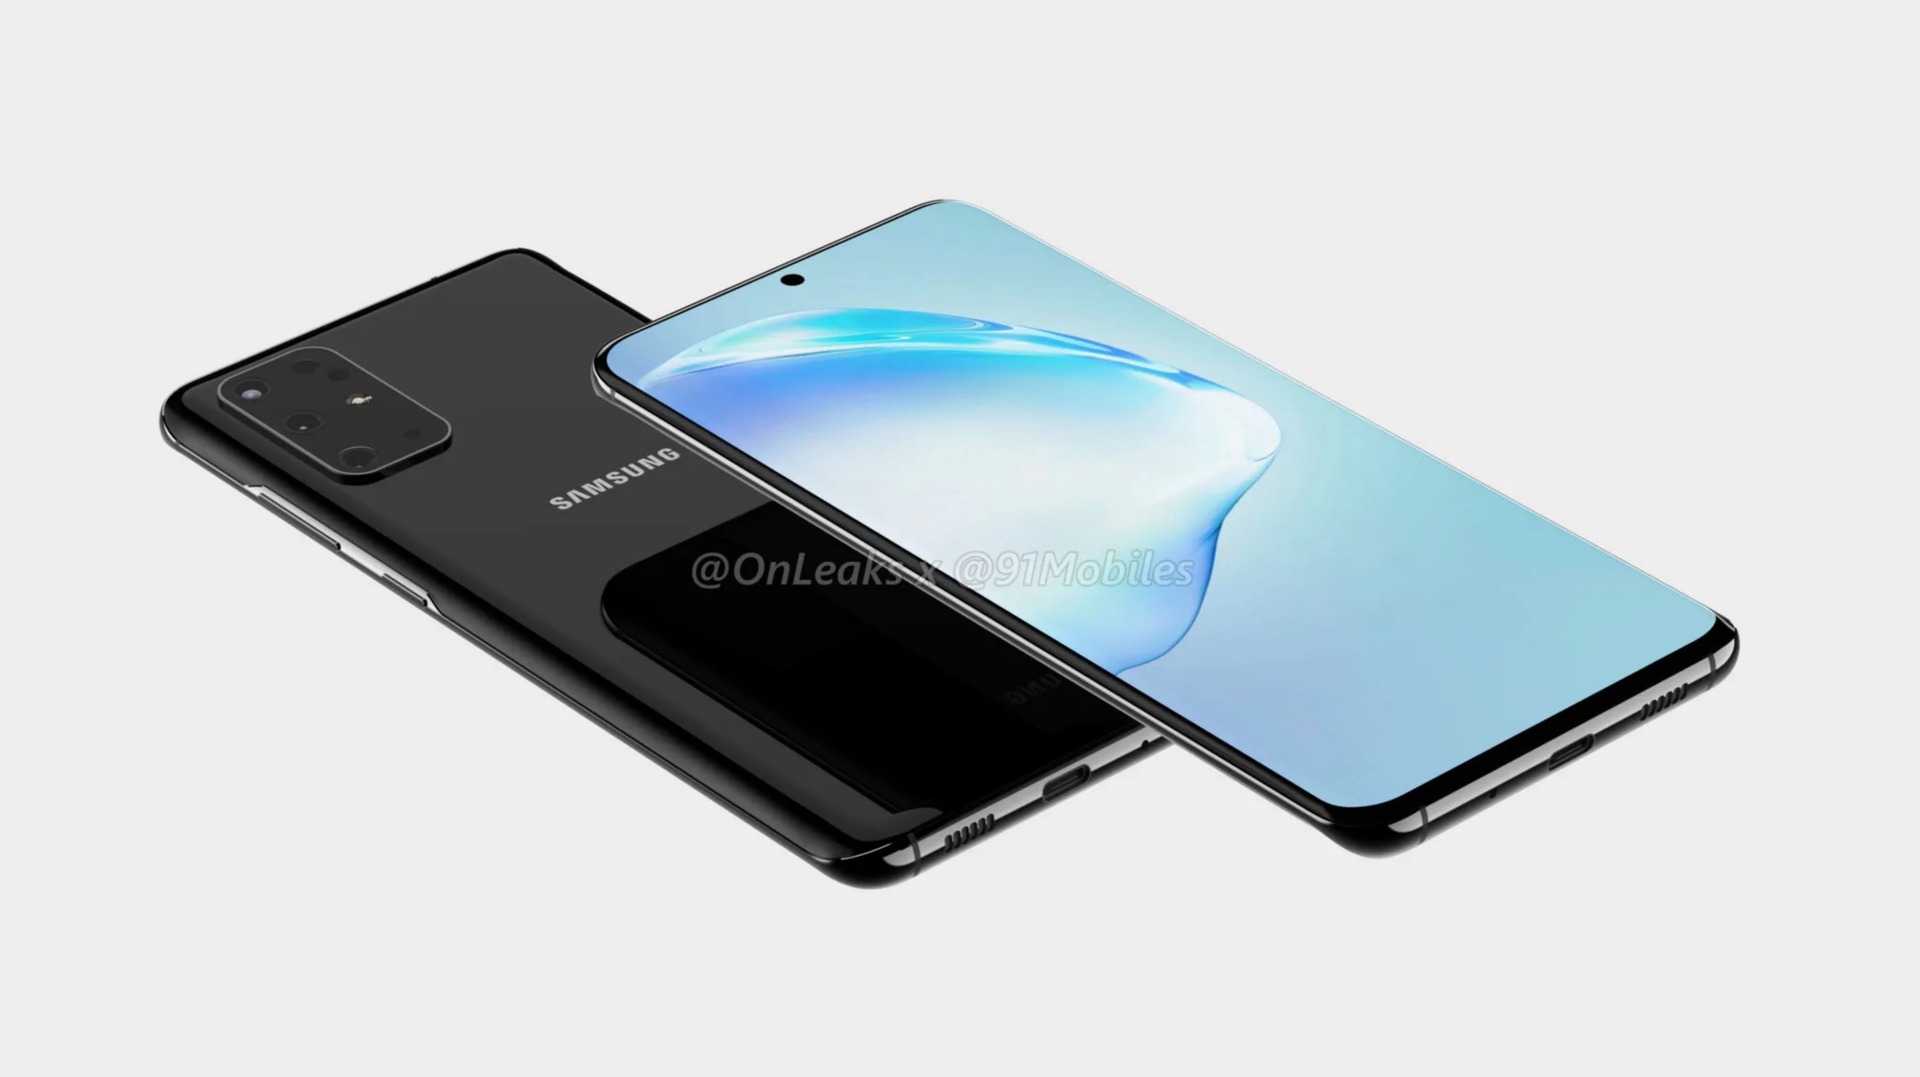 The apparent Samsung Galaxy S11 renders.